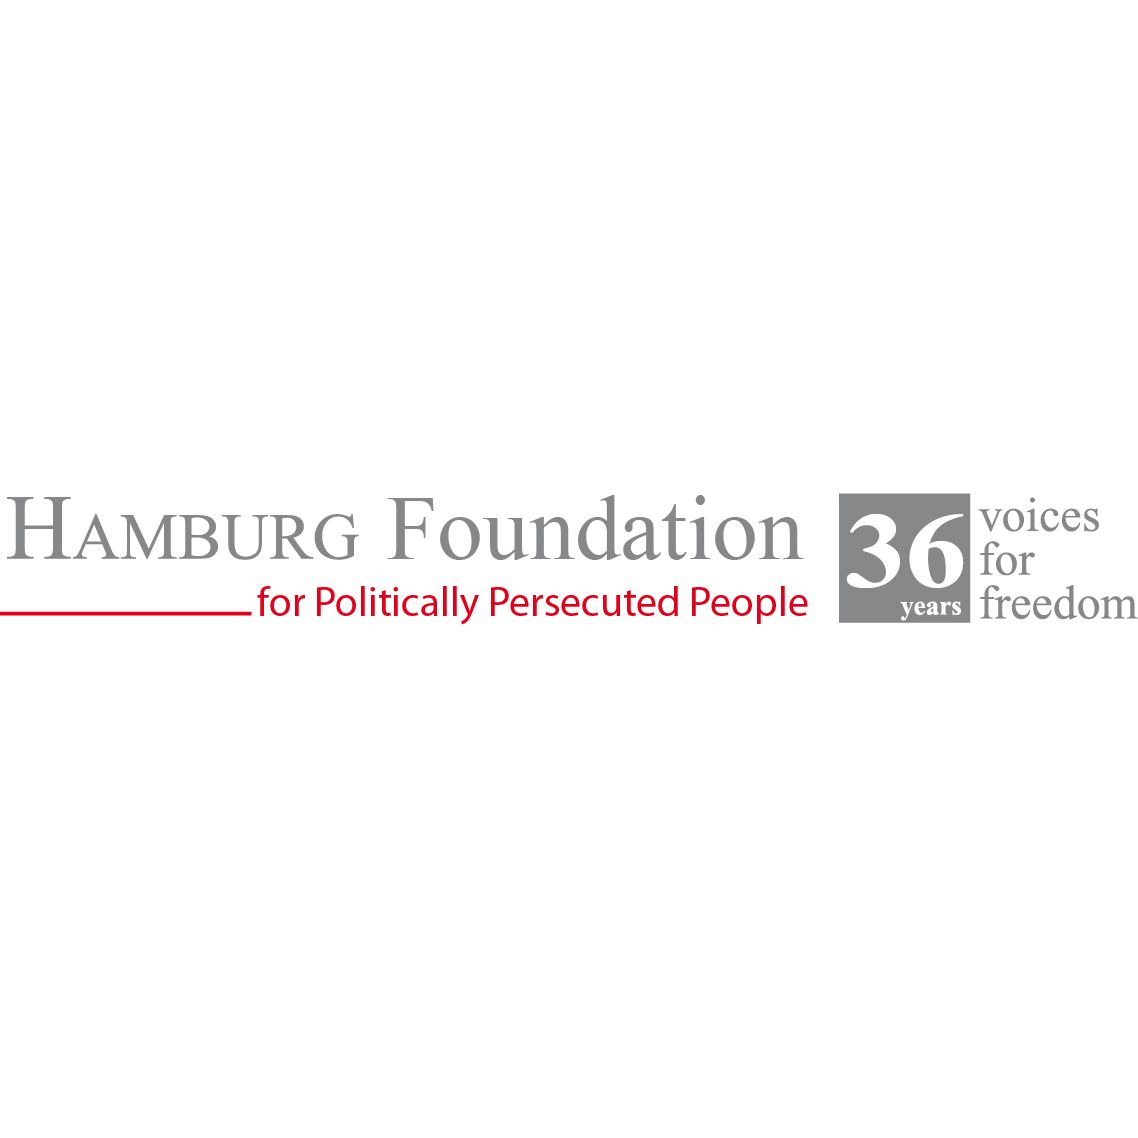 Hamburg Foundation for Politically Persecuted People